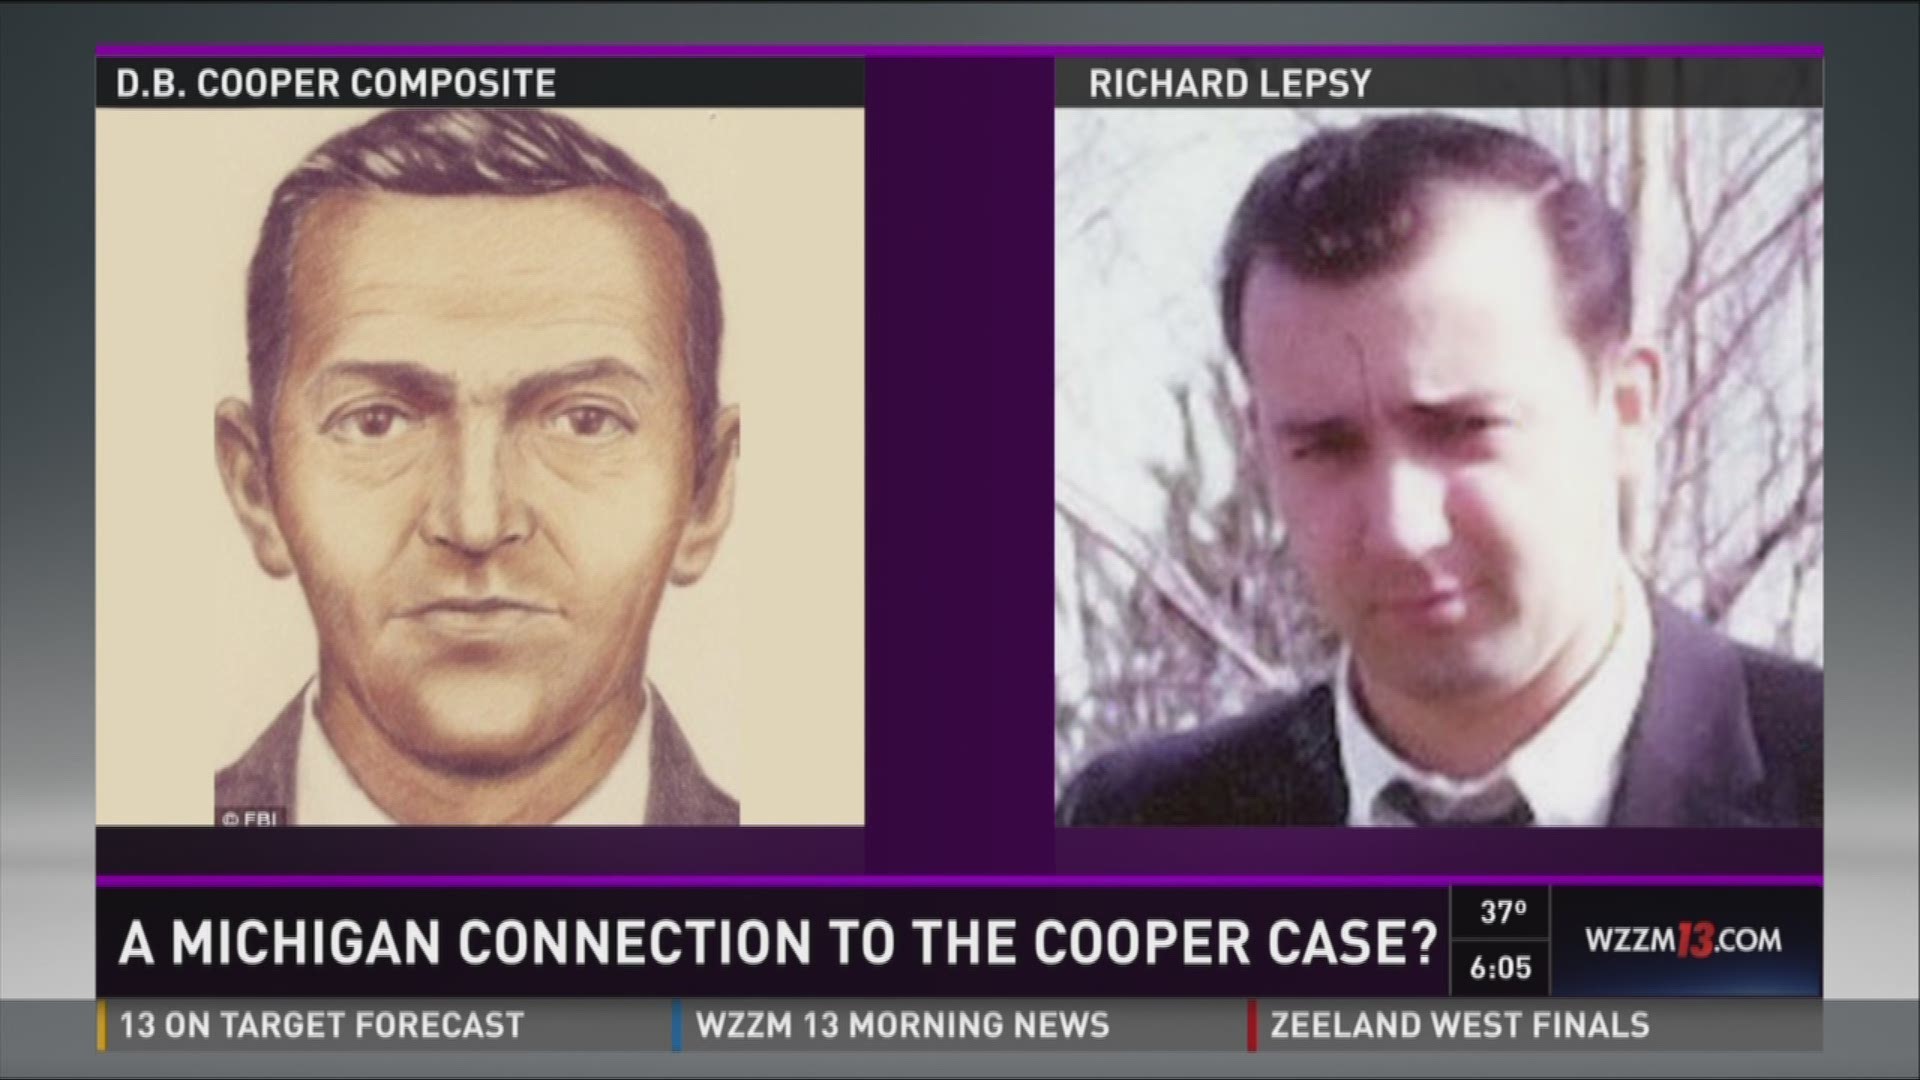 "Dan Cooper, otherwise known as D.B. Cooper, is an unidentified man."